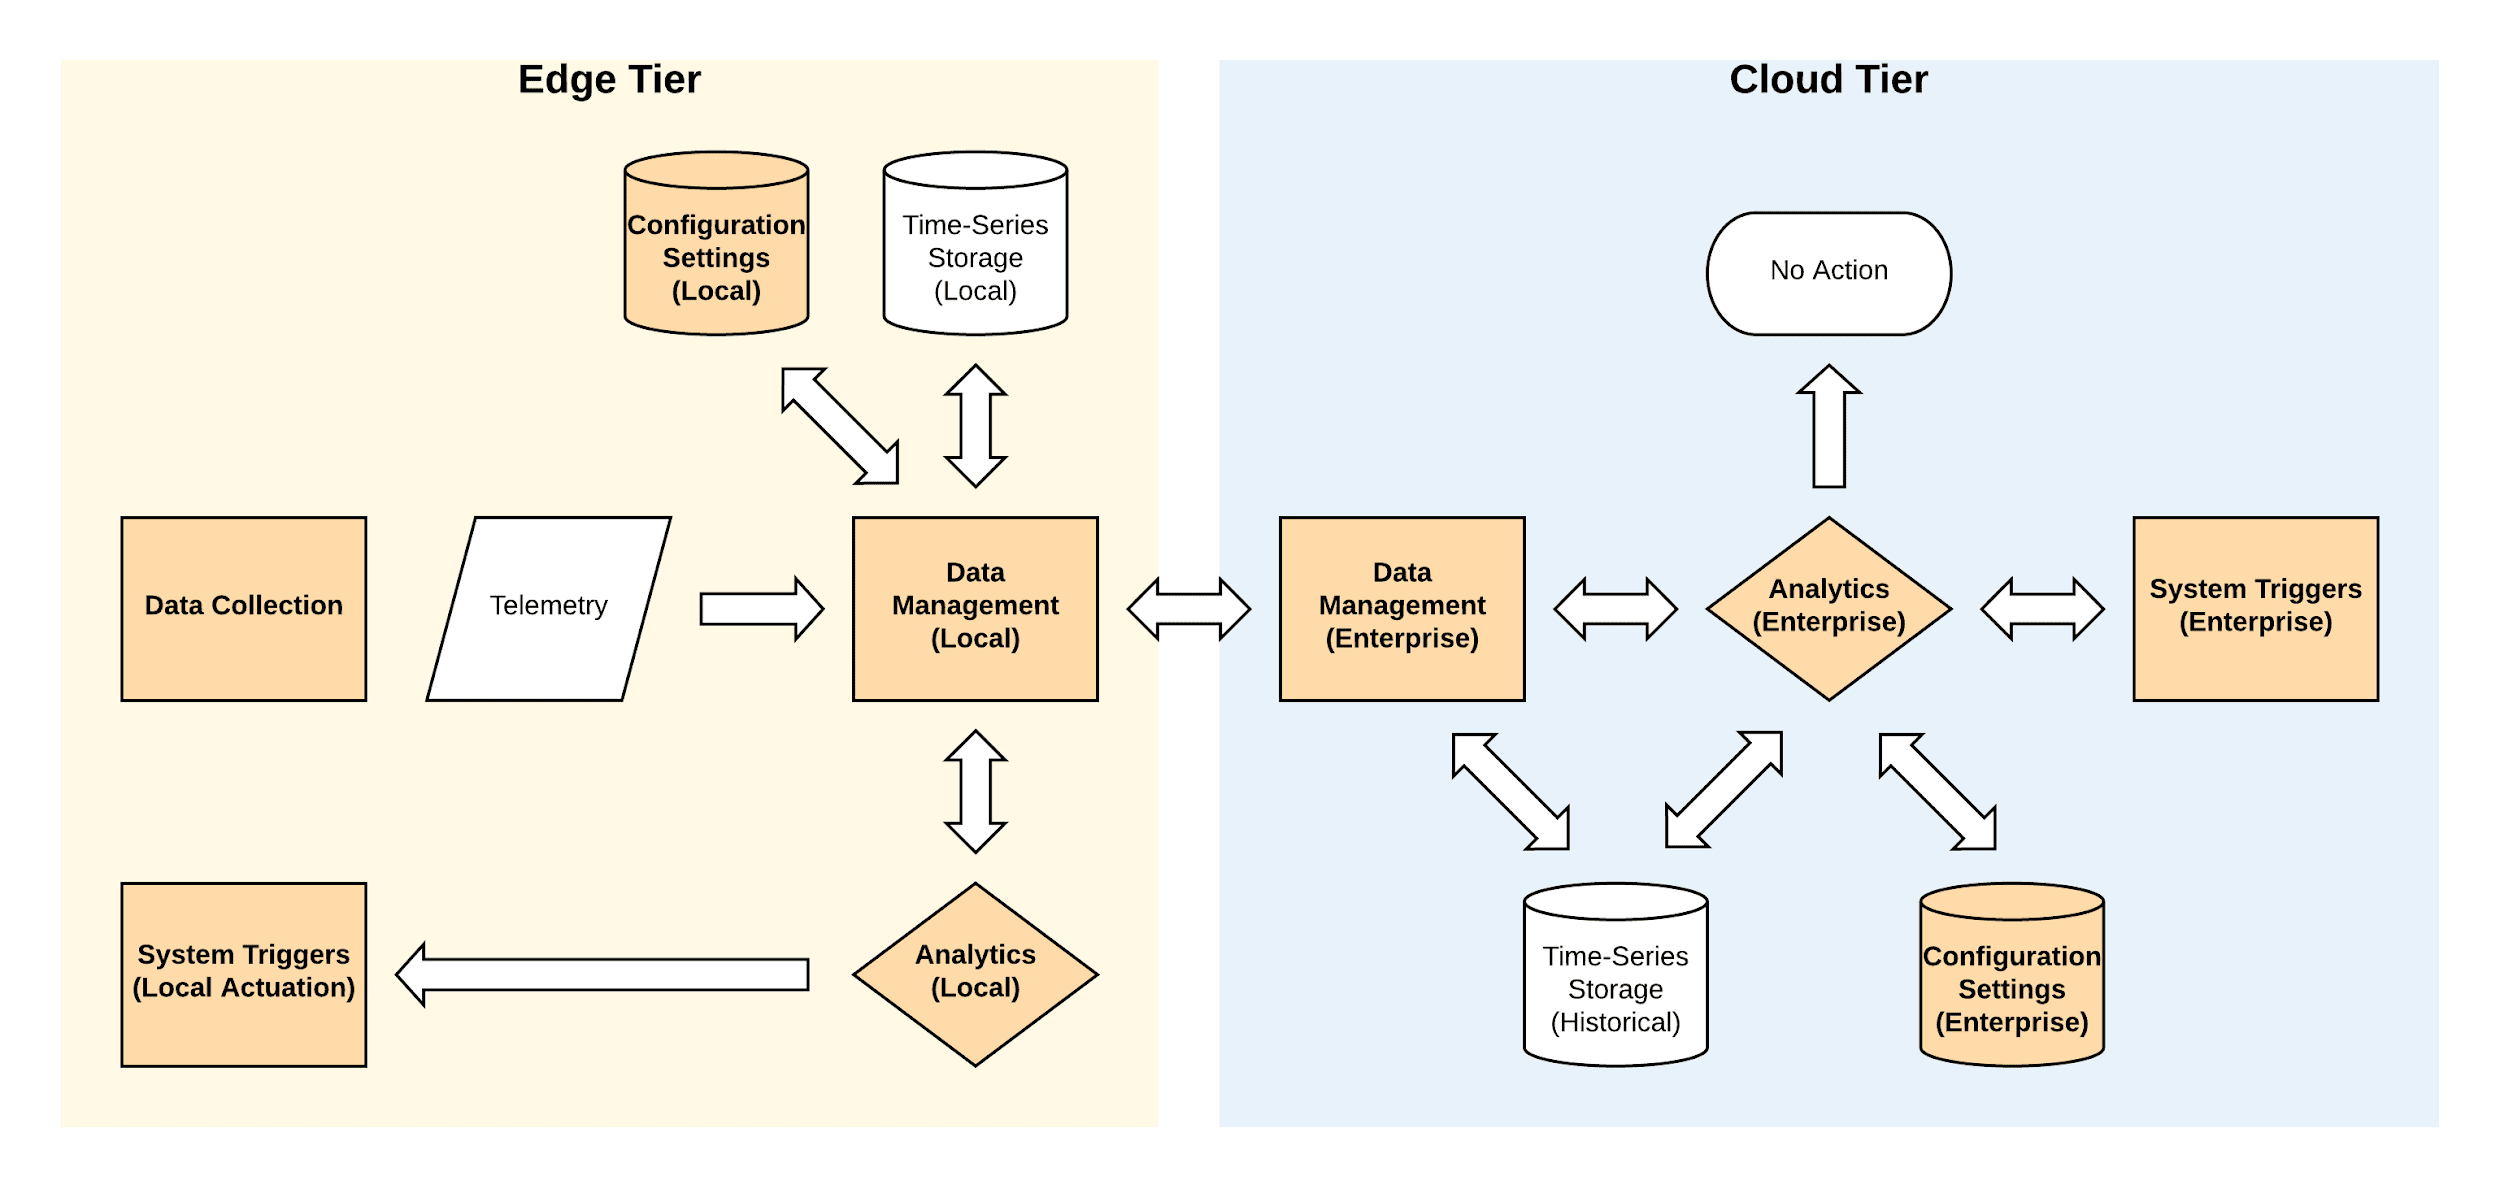   Notional IoT data flows between the Edge and Cloud Tiers